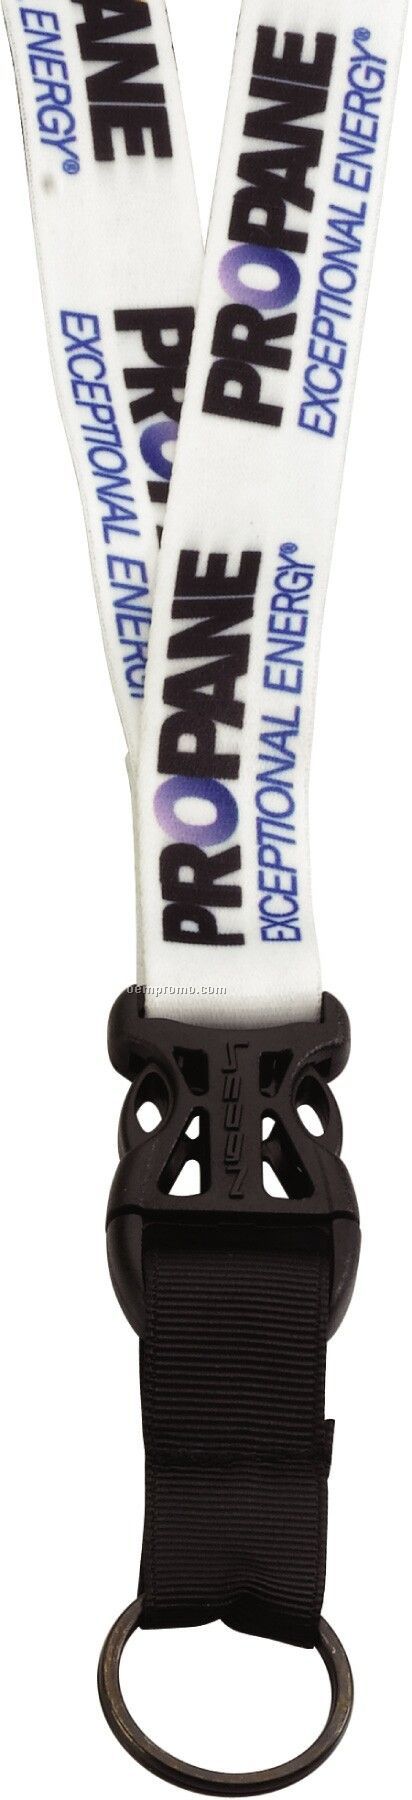 3/4" Dye Sublimated Lanyard With Plastic Snap Buckle Release & Split Ring